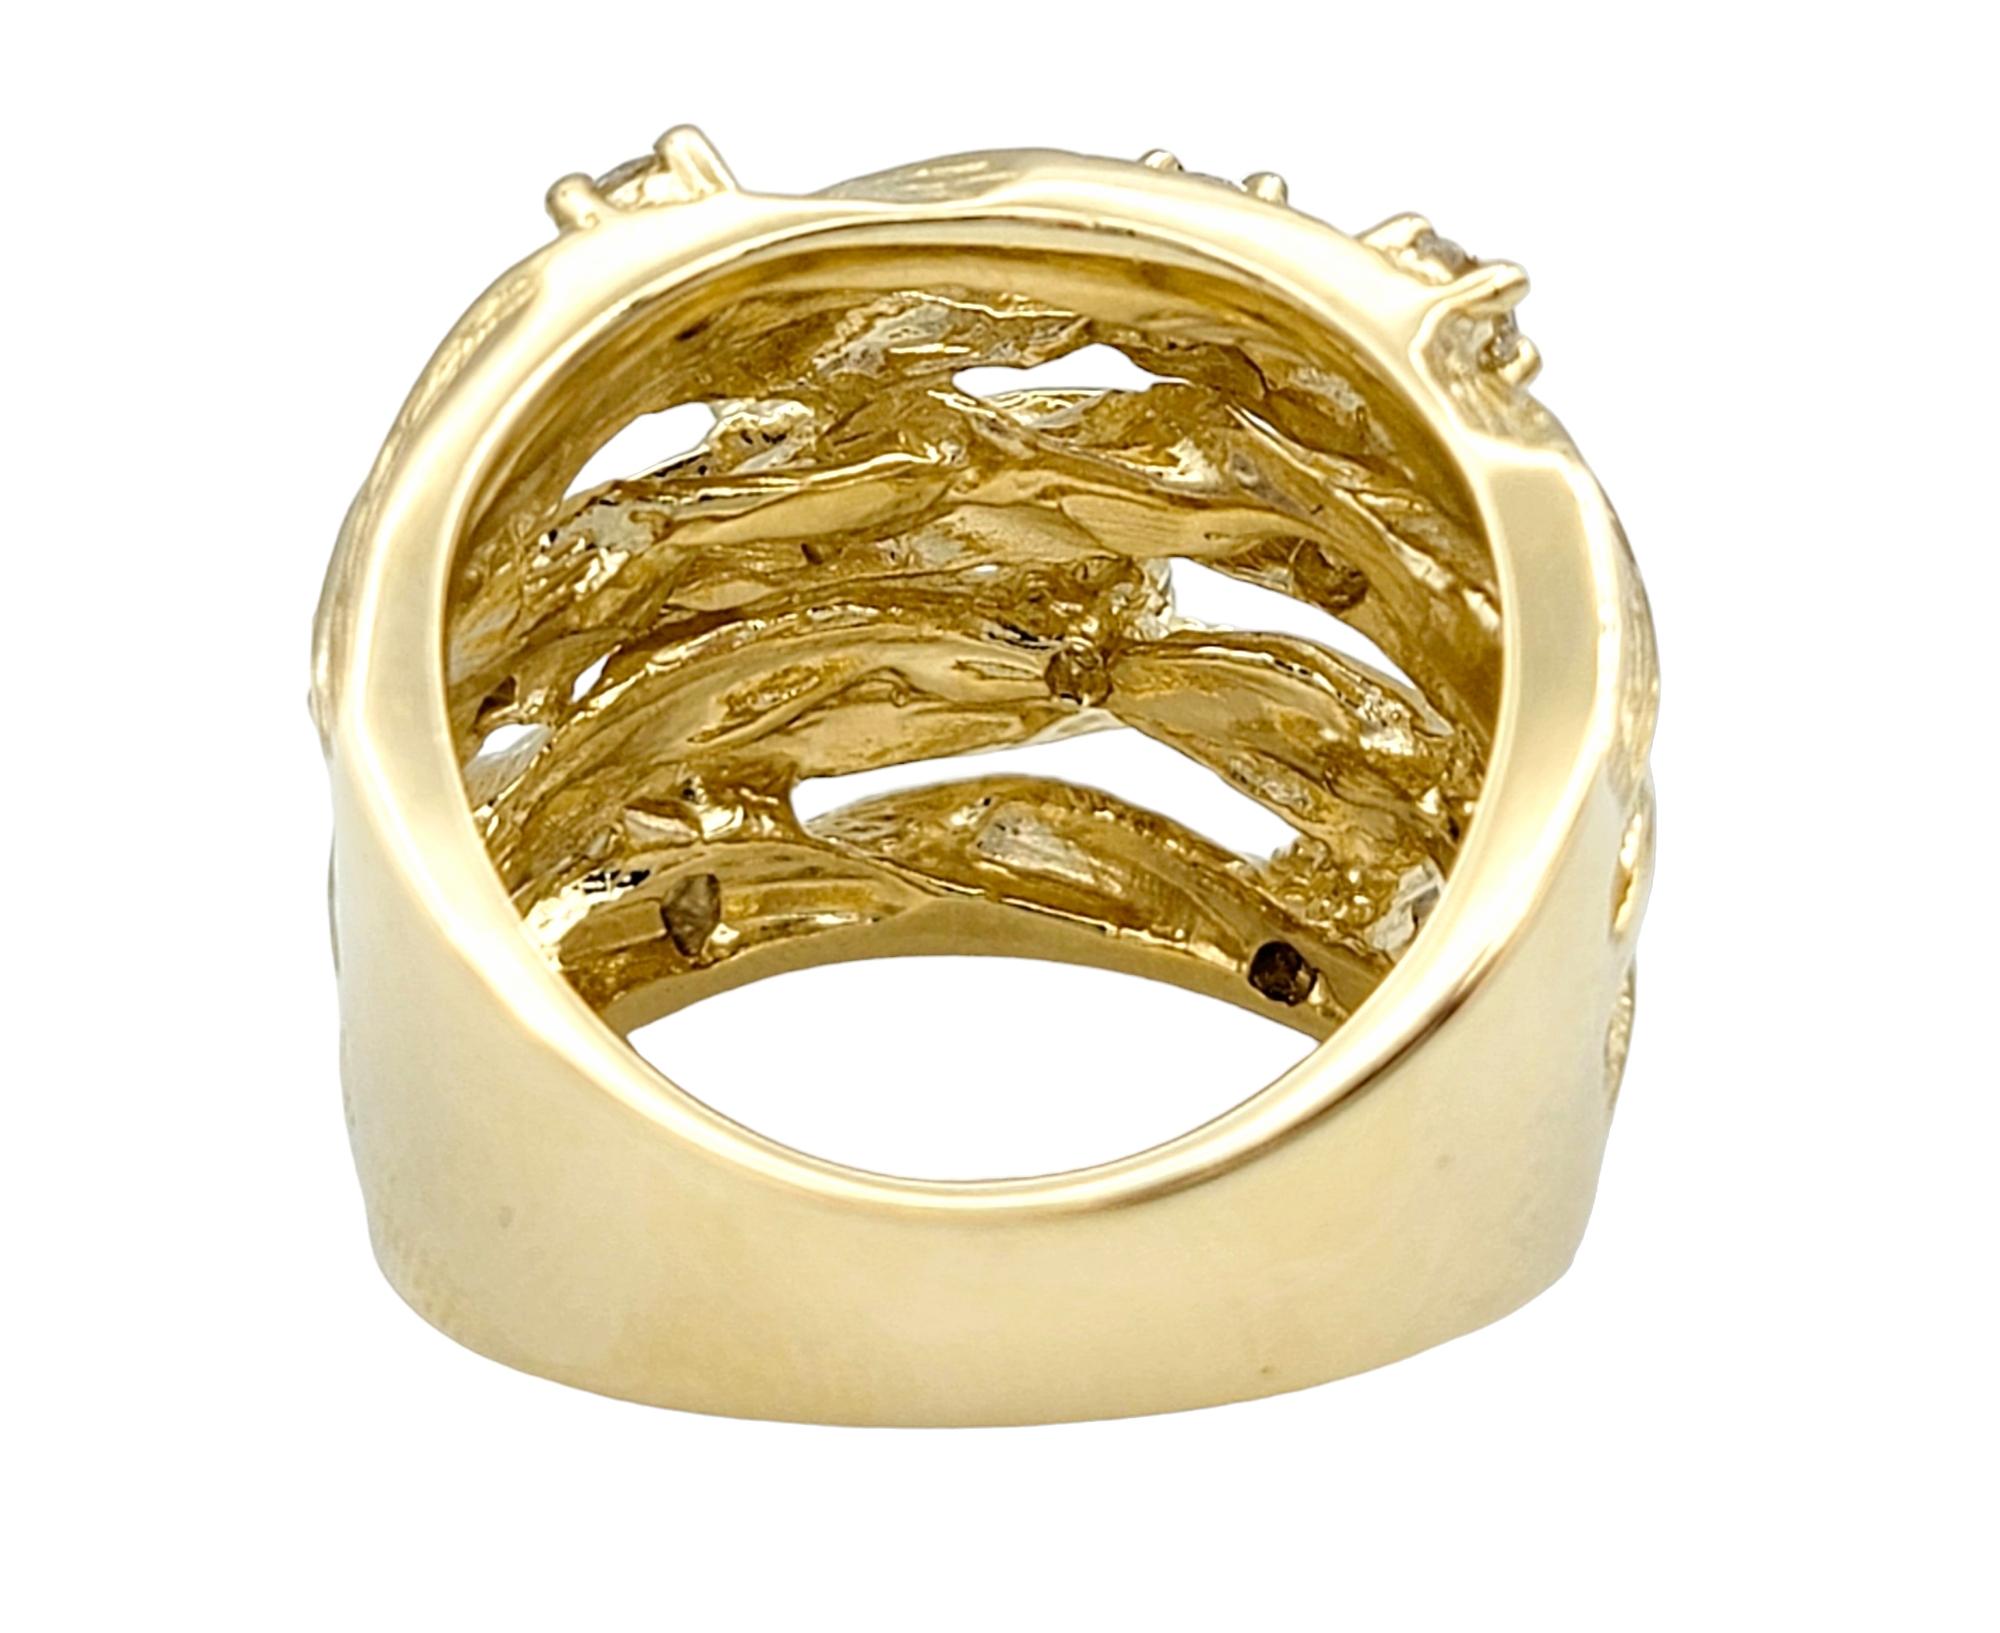 Effy D'Oro Round Diamond and Rope Design Wide Band Ring in 14 Karat Yellow Gold In Good Condition For Sale In Scottsdale, AZ